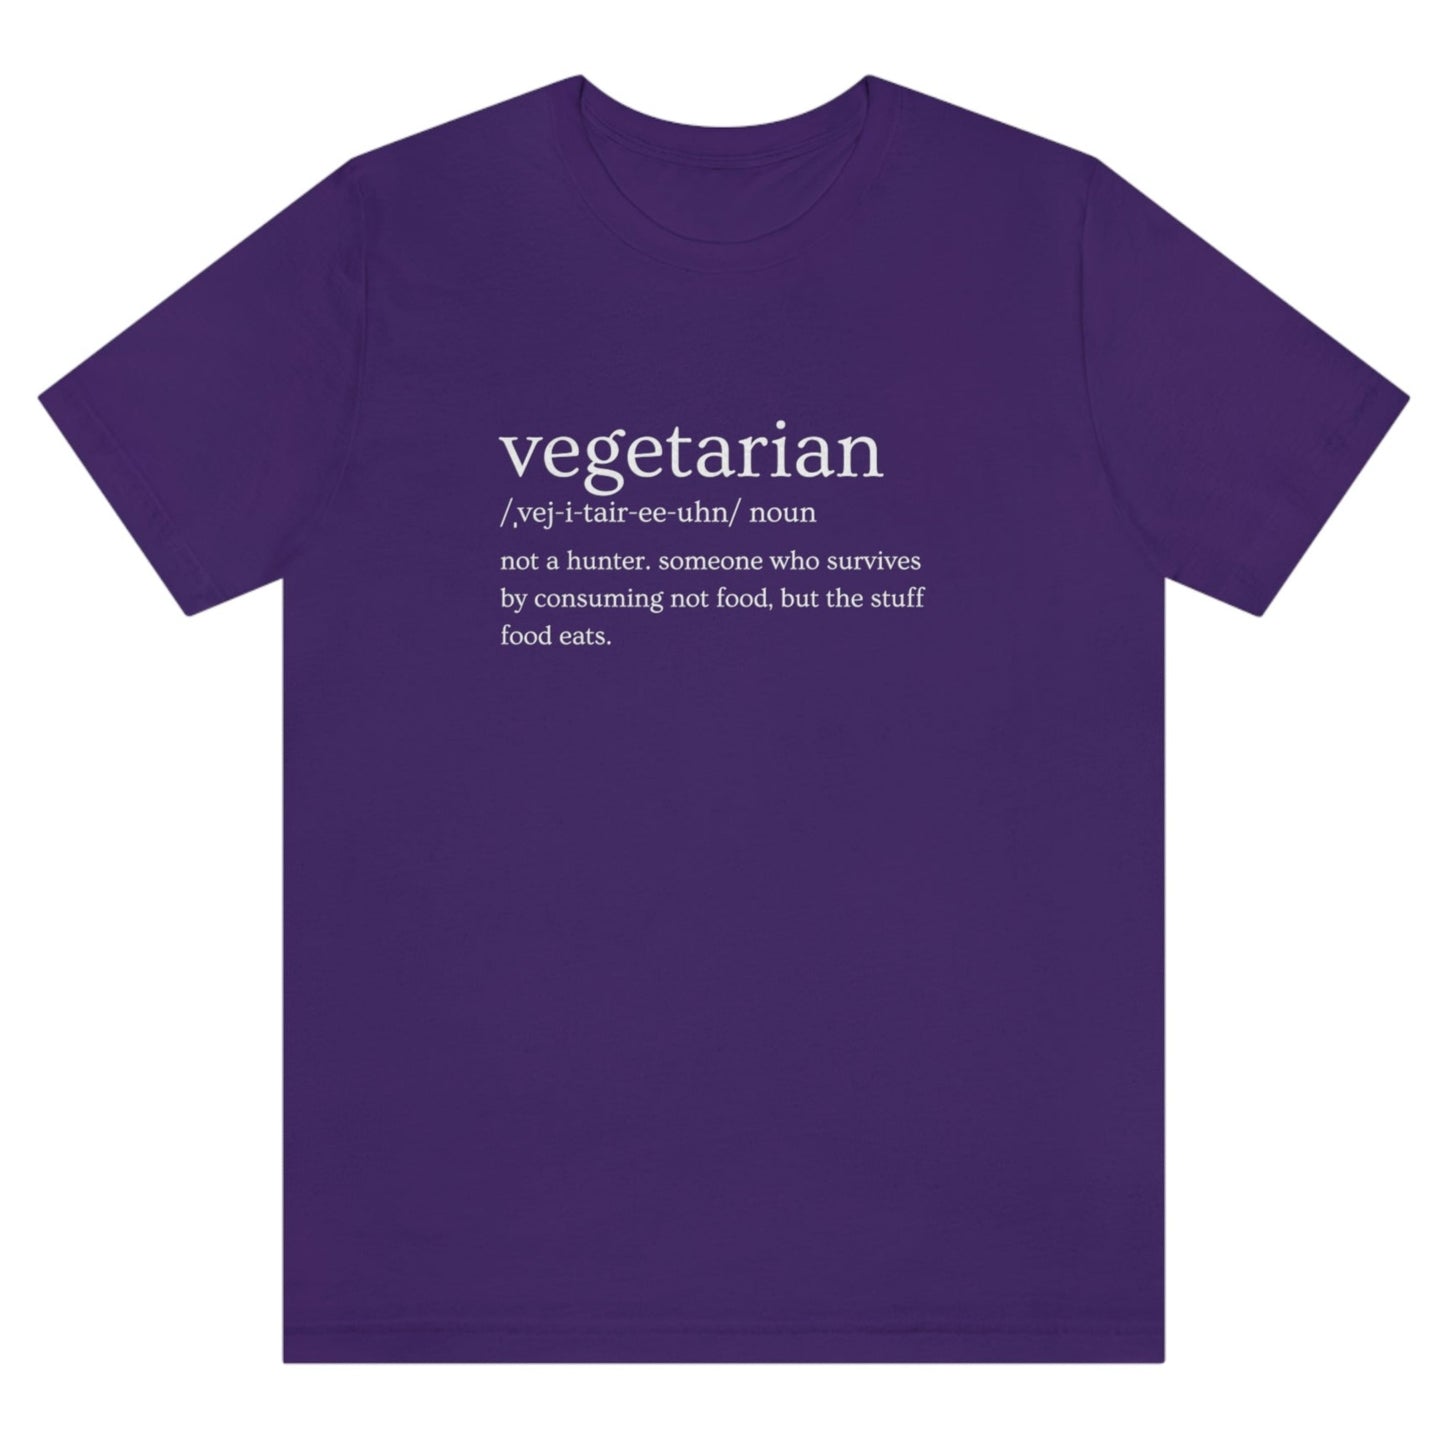 vegetarian-definition-not-a-hunter-someone-who-survives-by-consuming-not-food-but-the-stuff-food-eats-team-purple-t-shirt